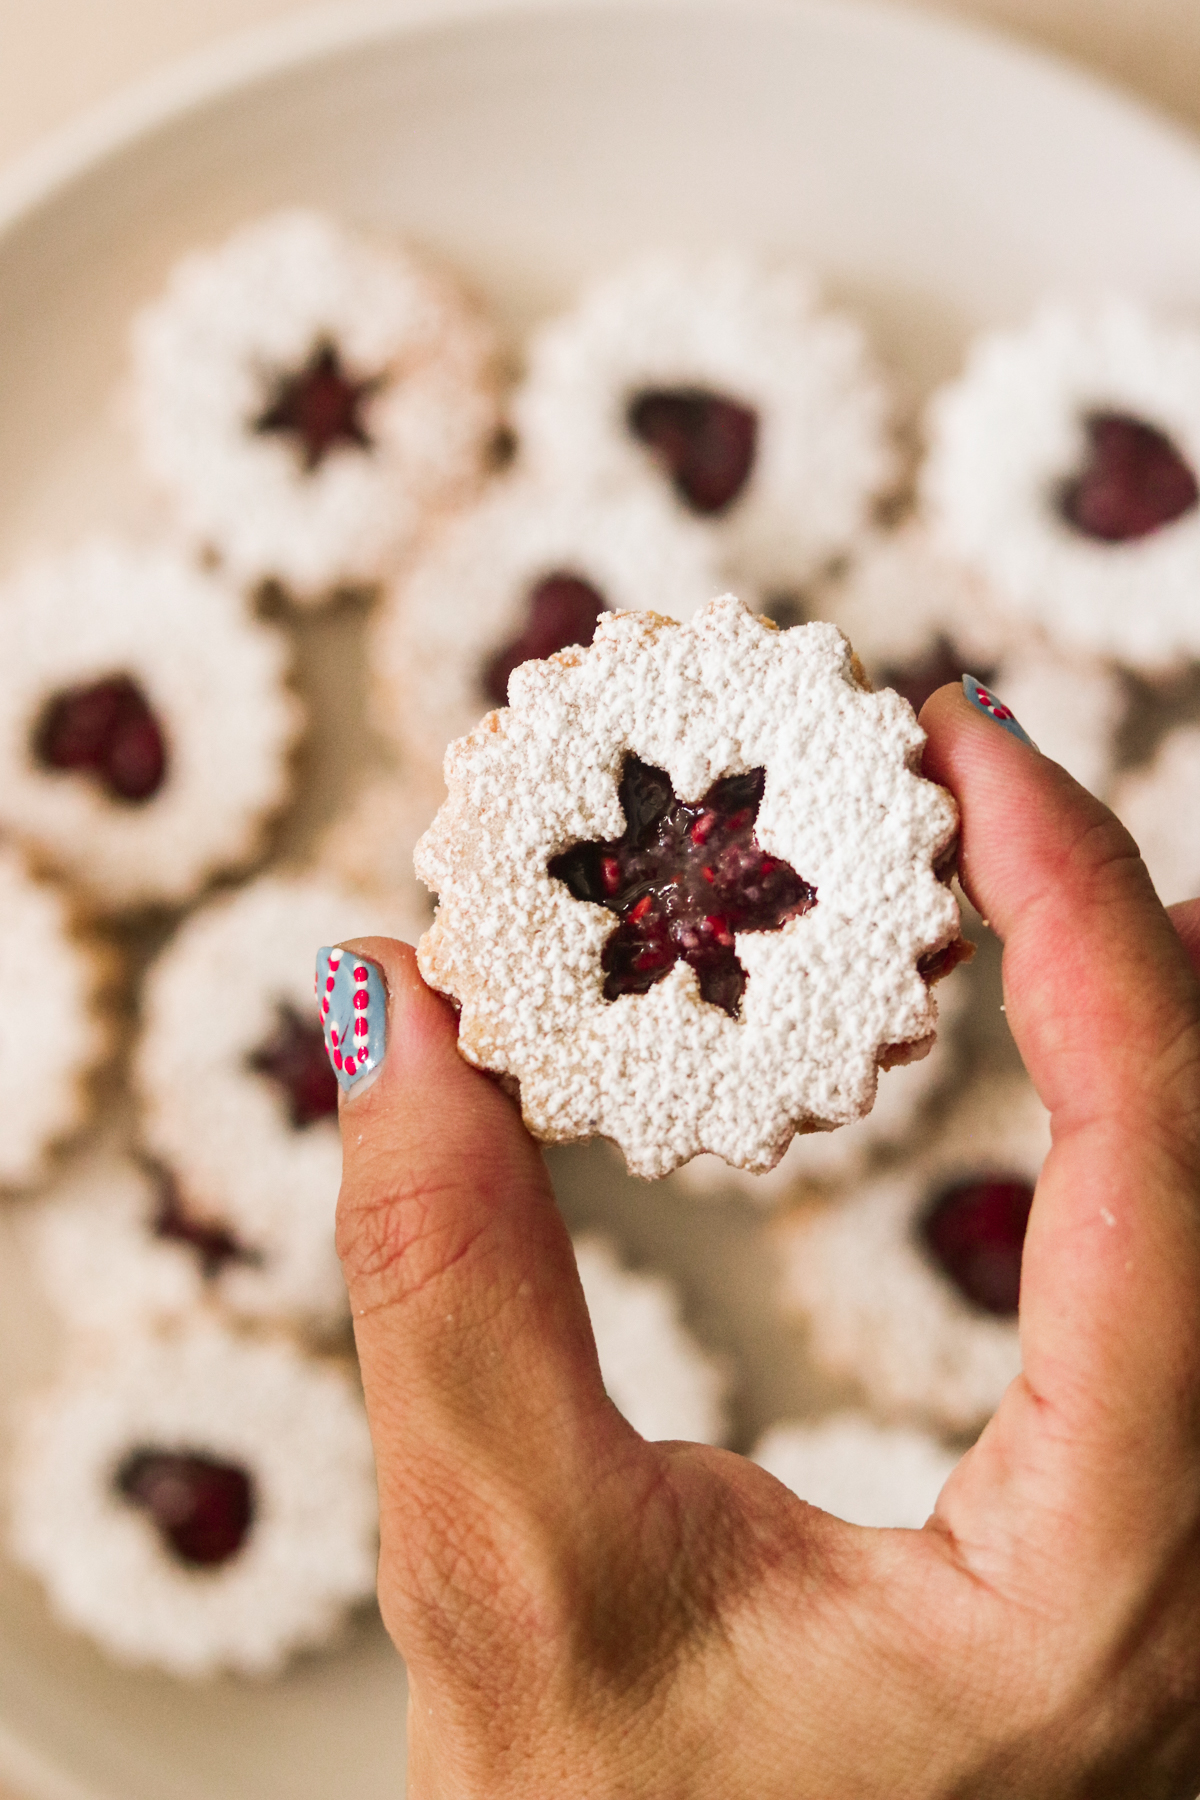 a hand holding a linzer cookie with a snowflake shape in the center